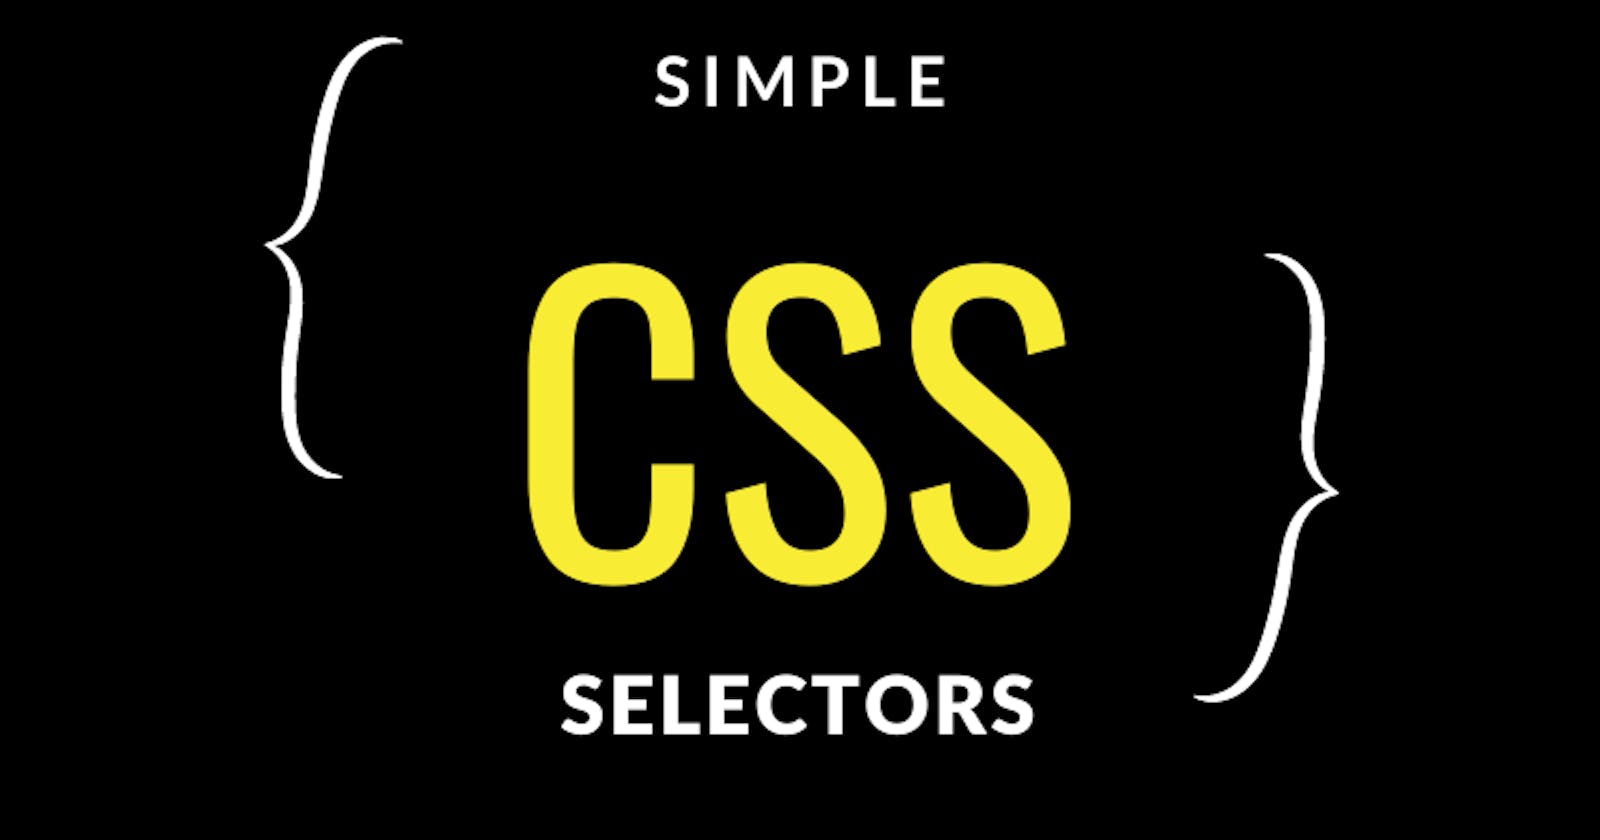 Some* Basic/Simple CSS Selectors